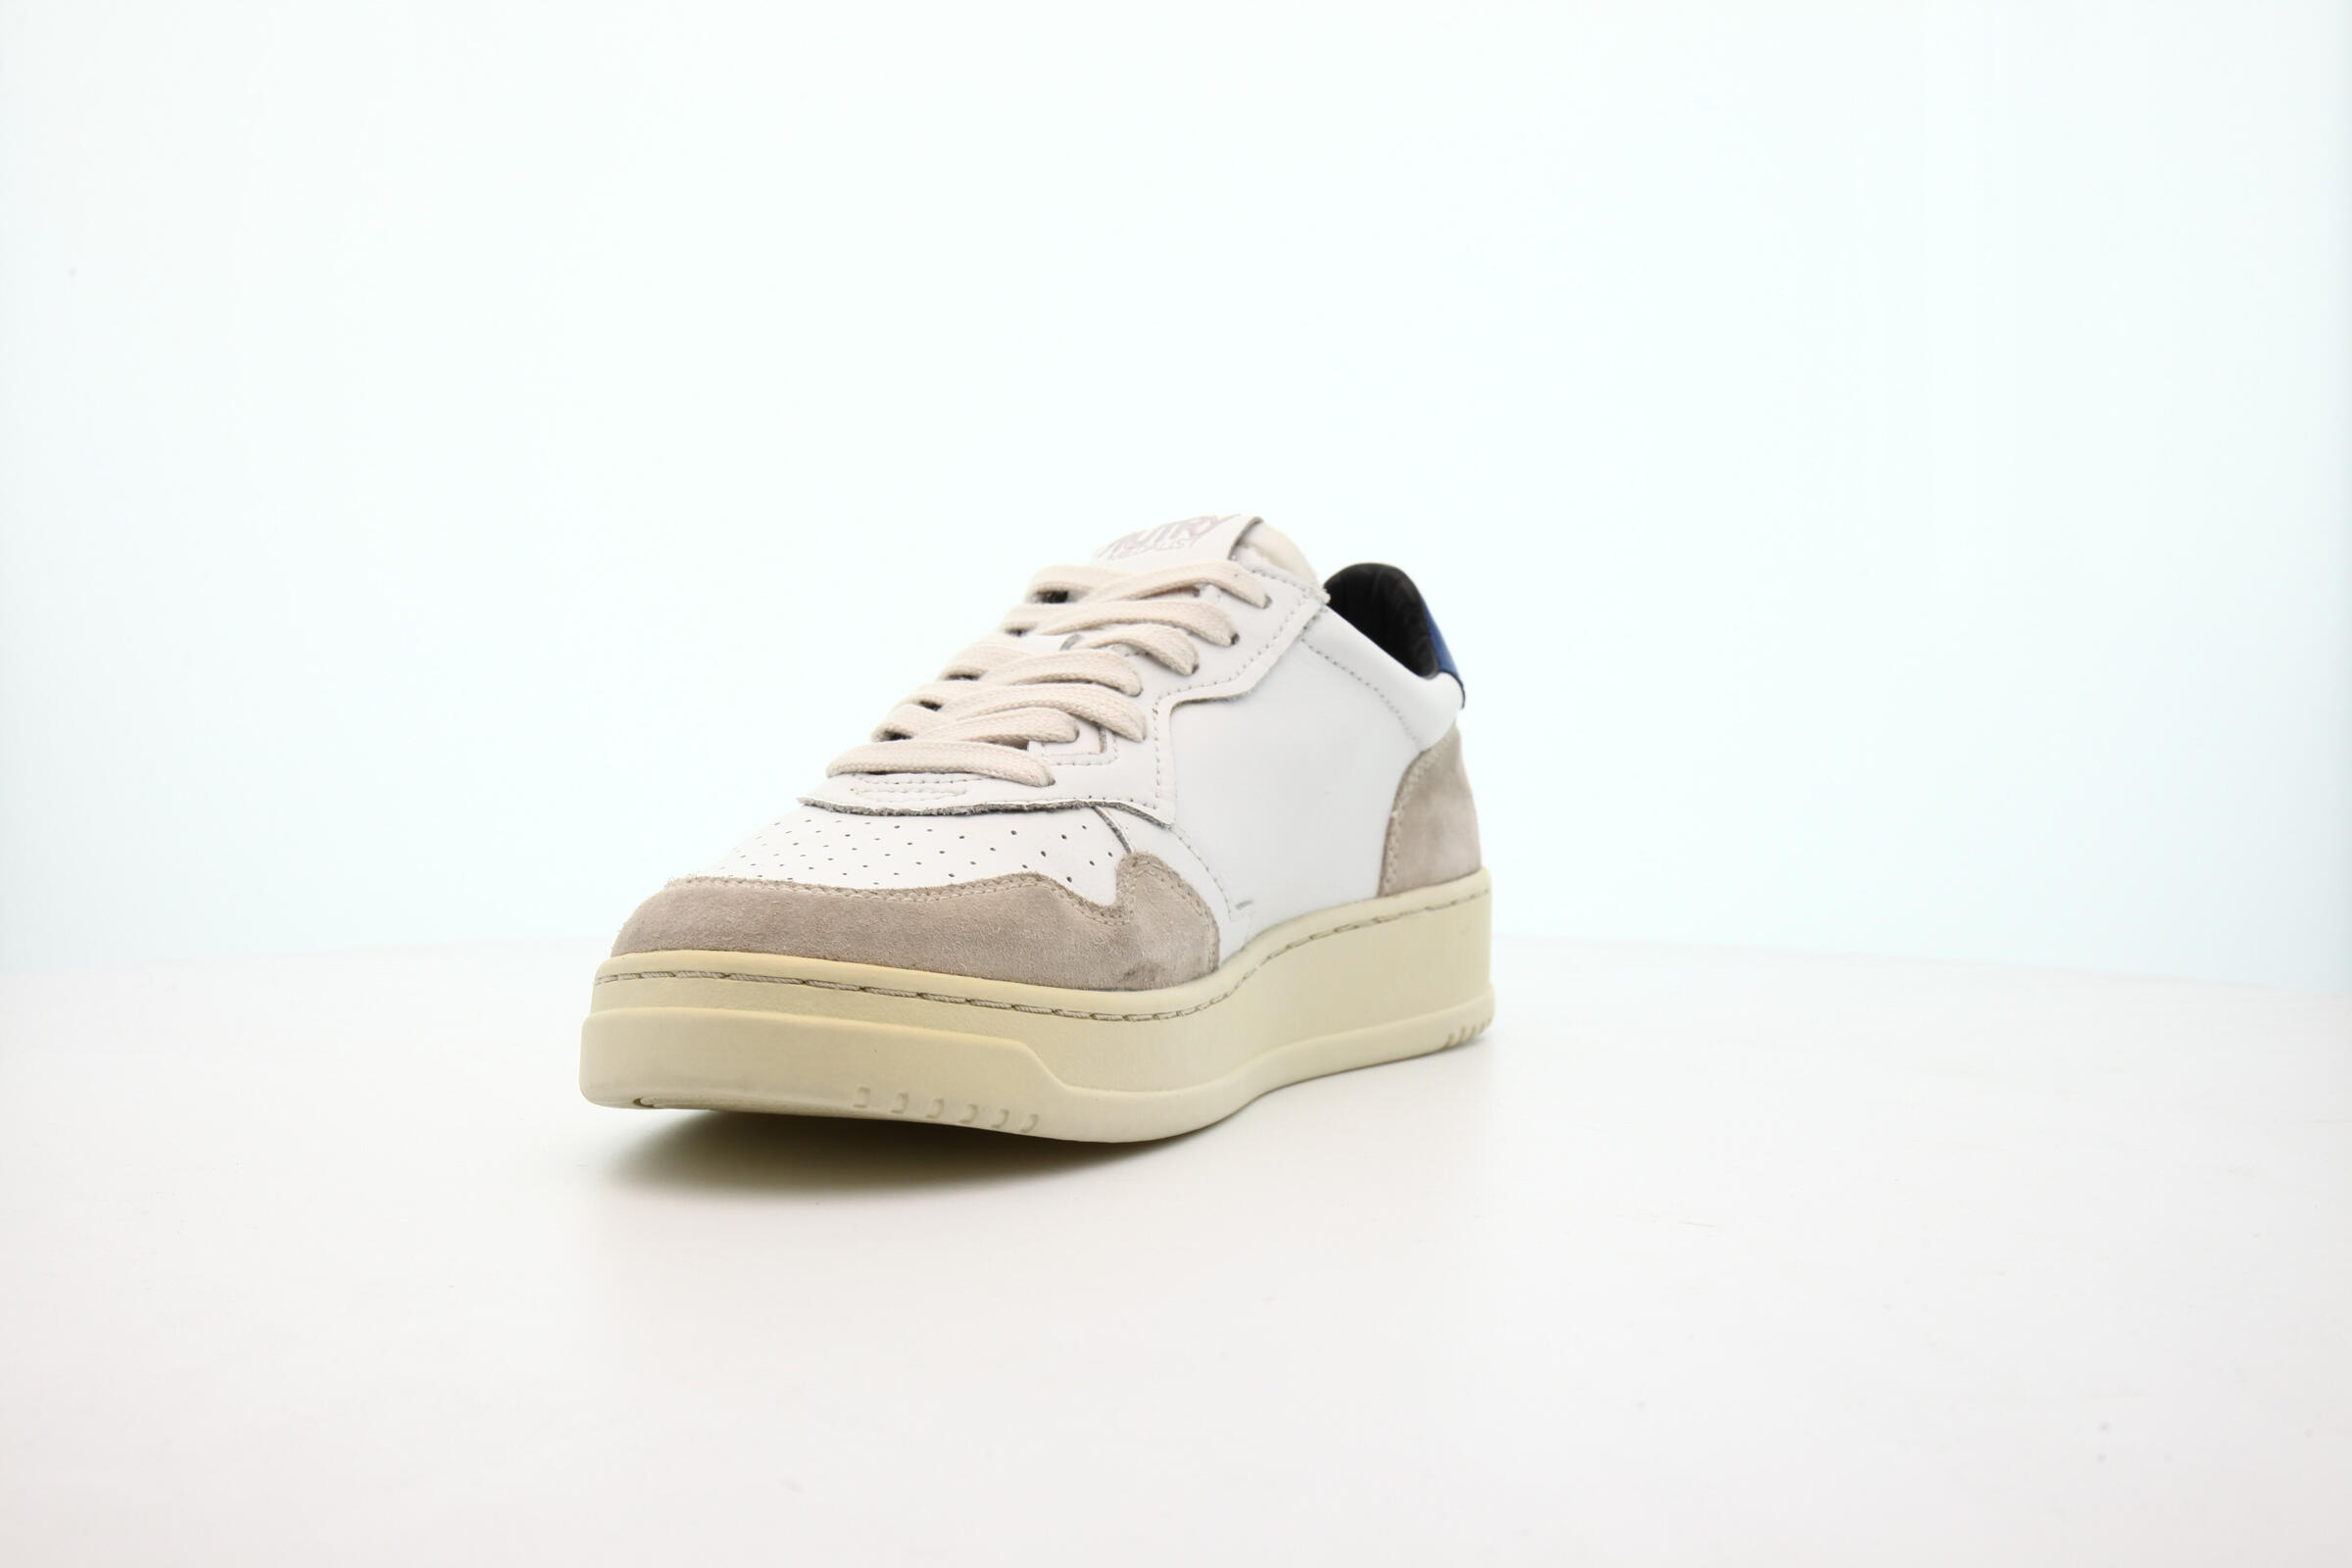 Autry Action Shoes MEDALIST LOW "BABY BLUE"